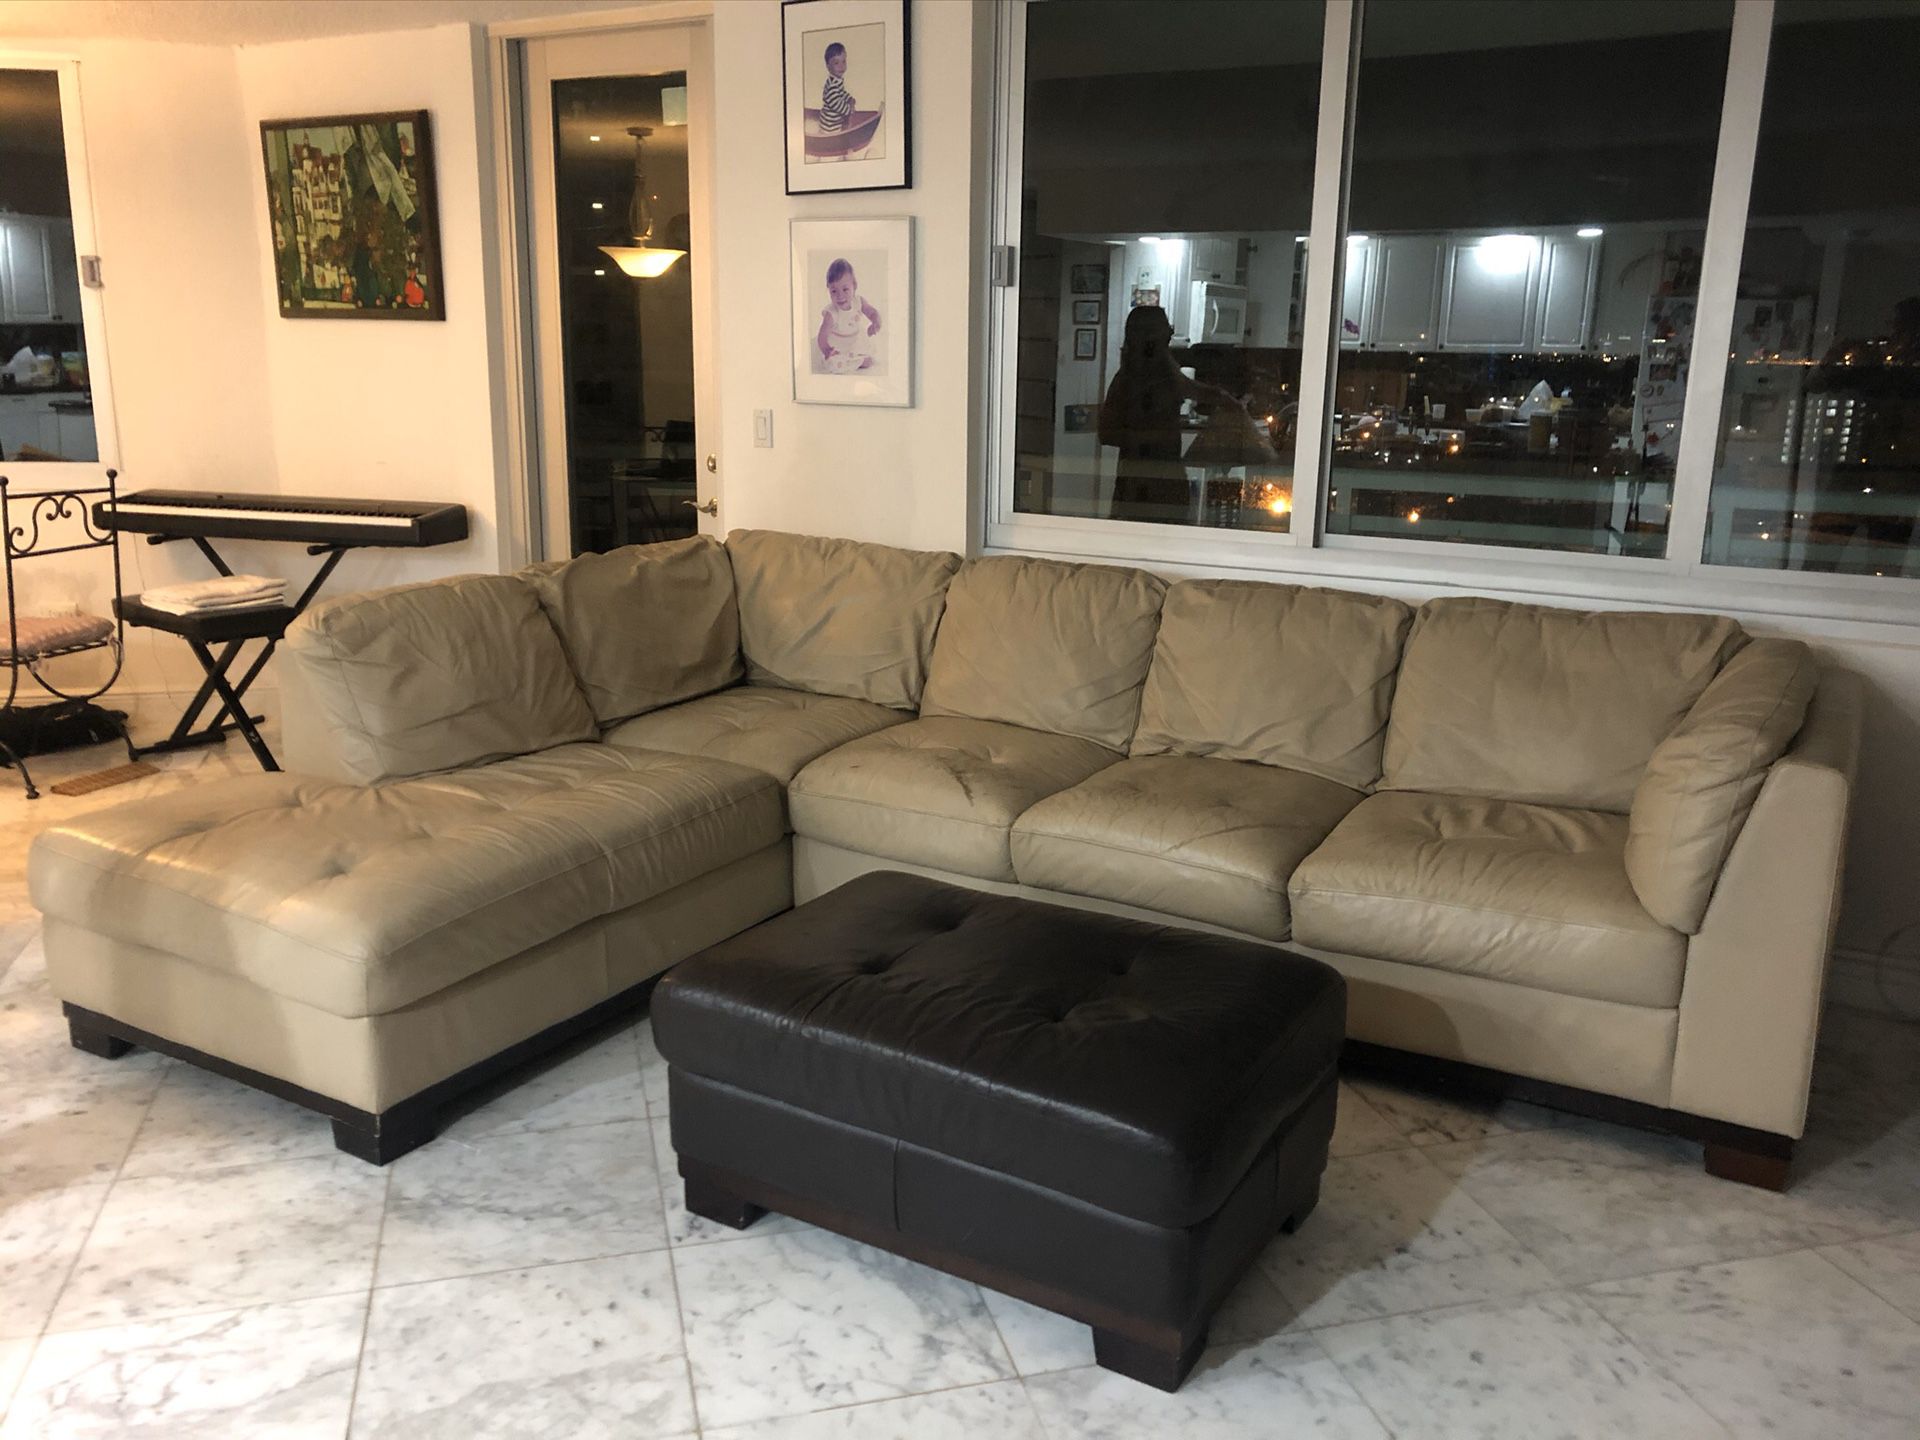 Beige sectional leather couch with brown ottoman.